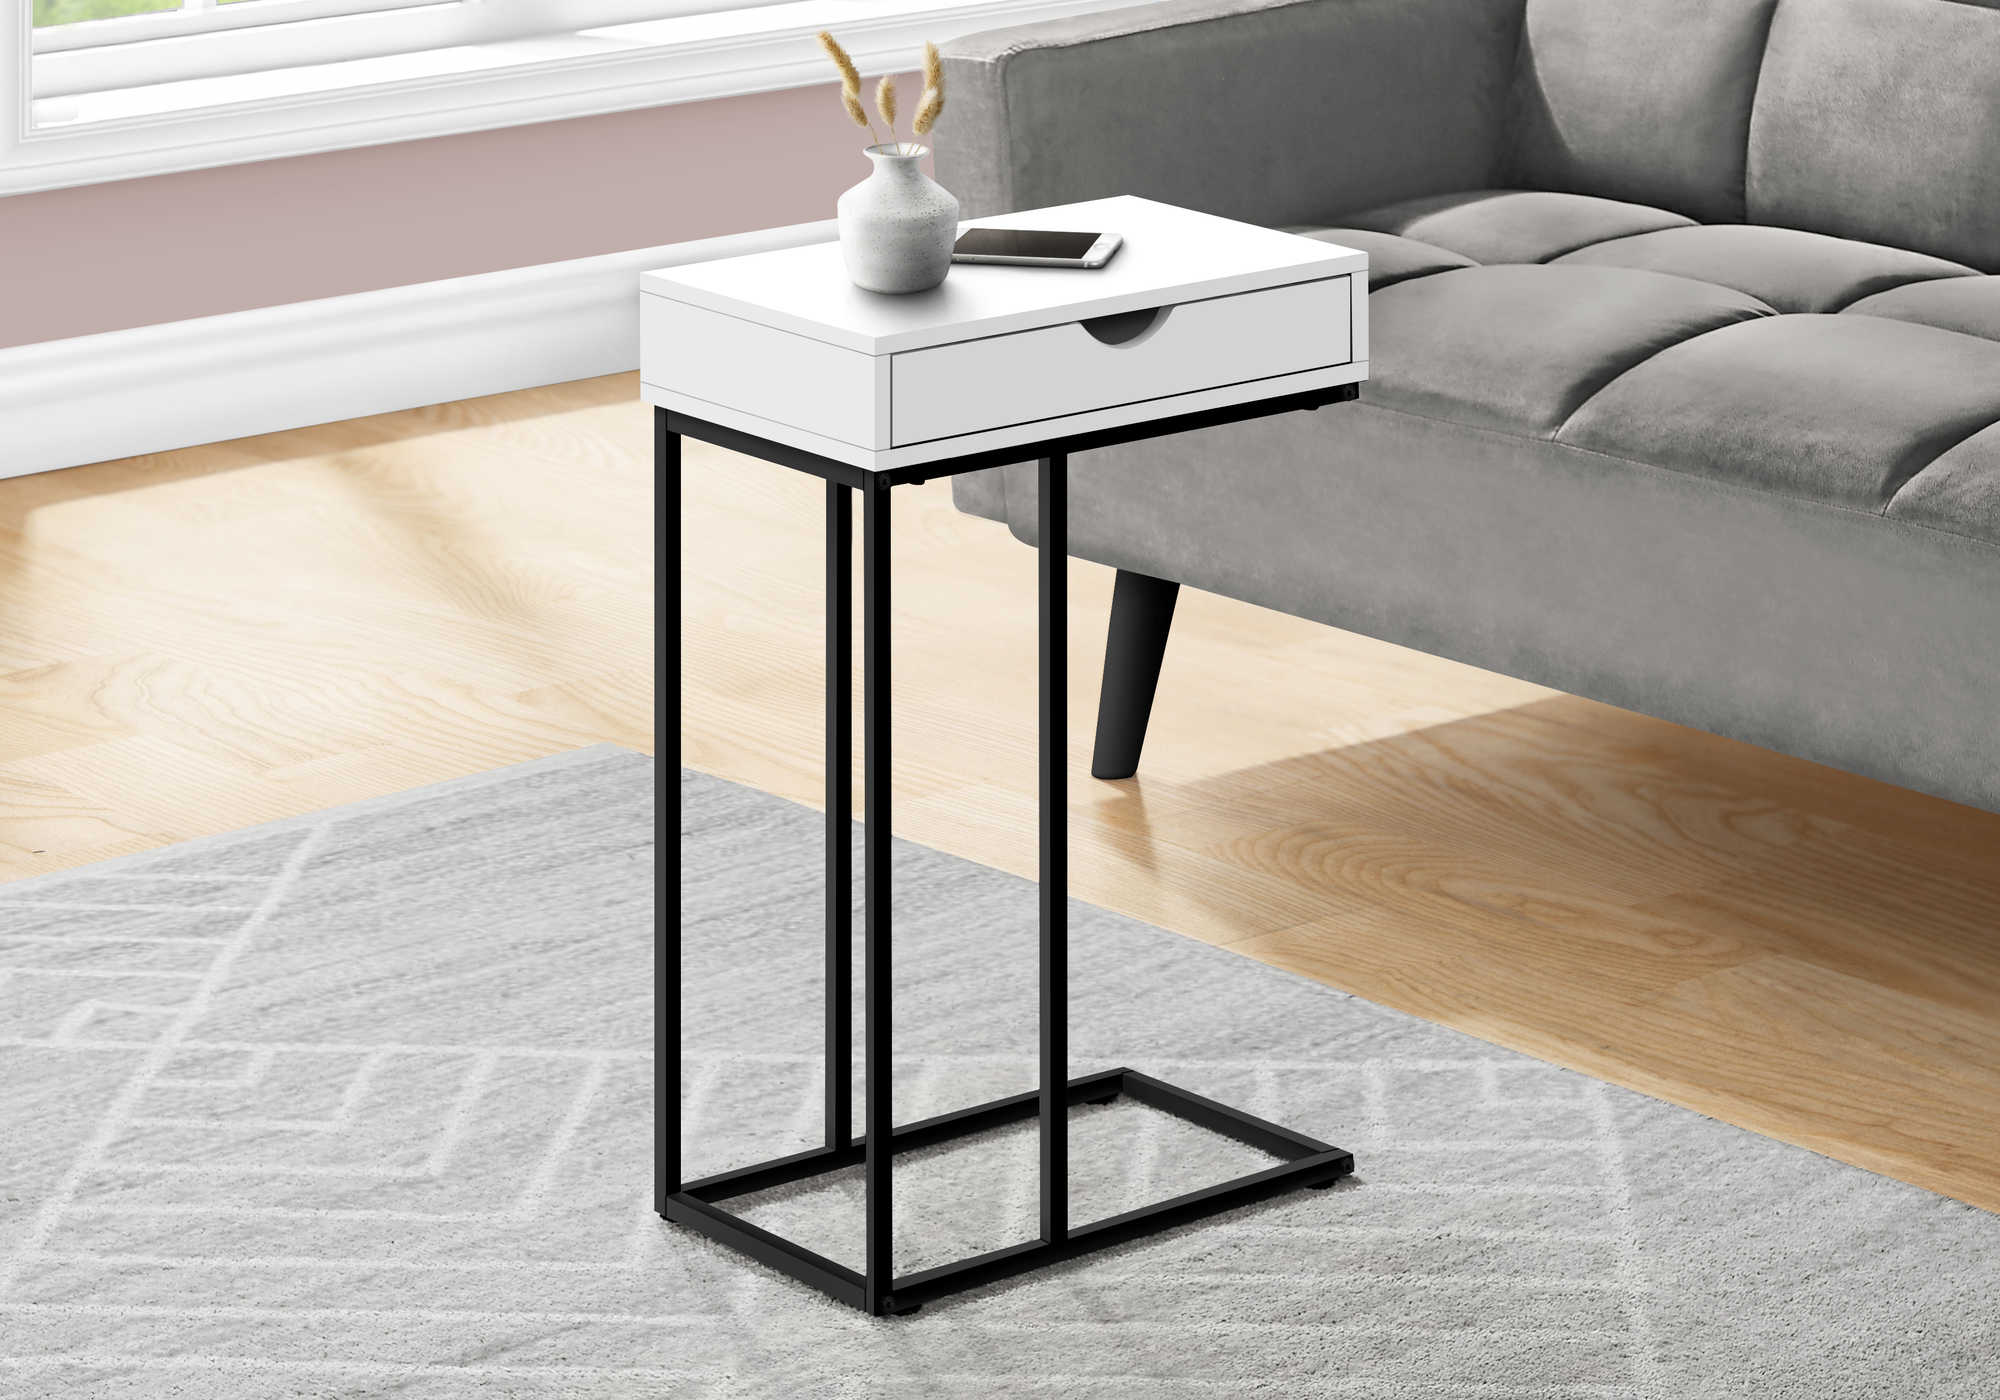 ACCENT TABLE - 25"H / WHITE / BLACK METAL